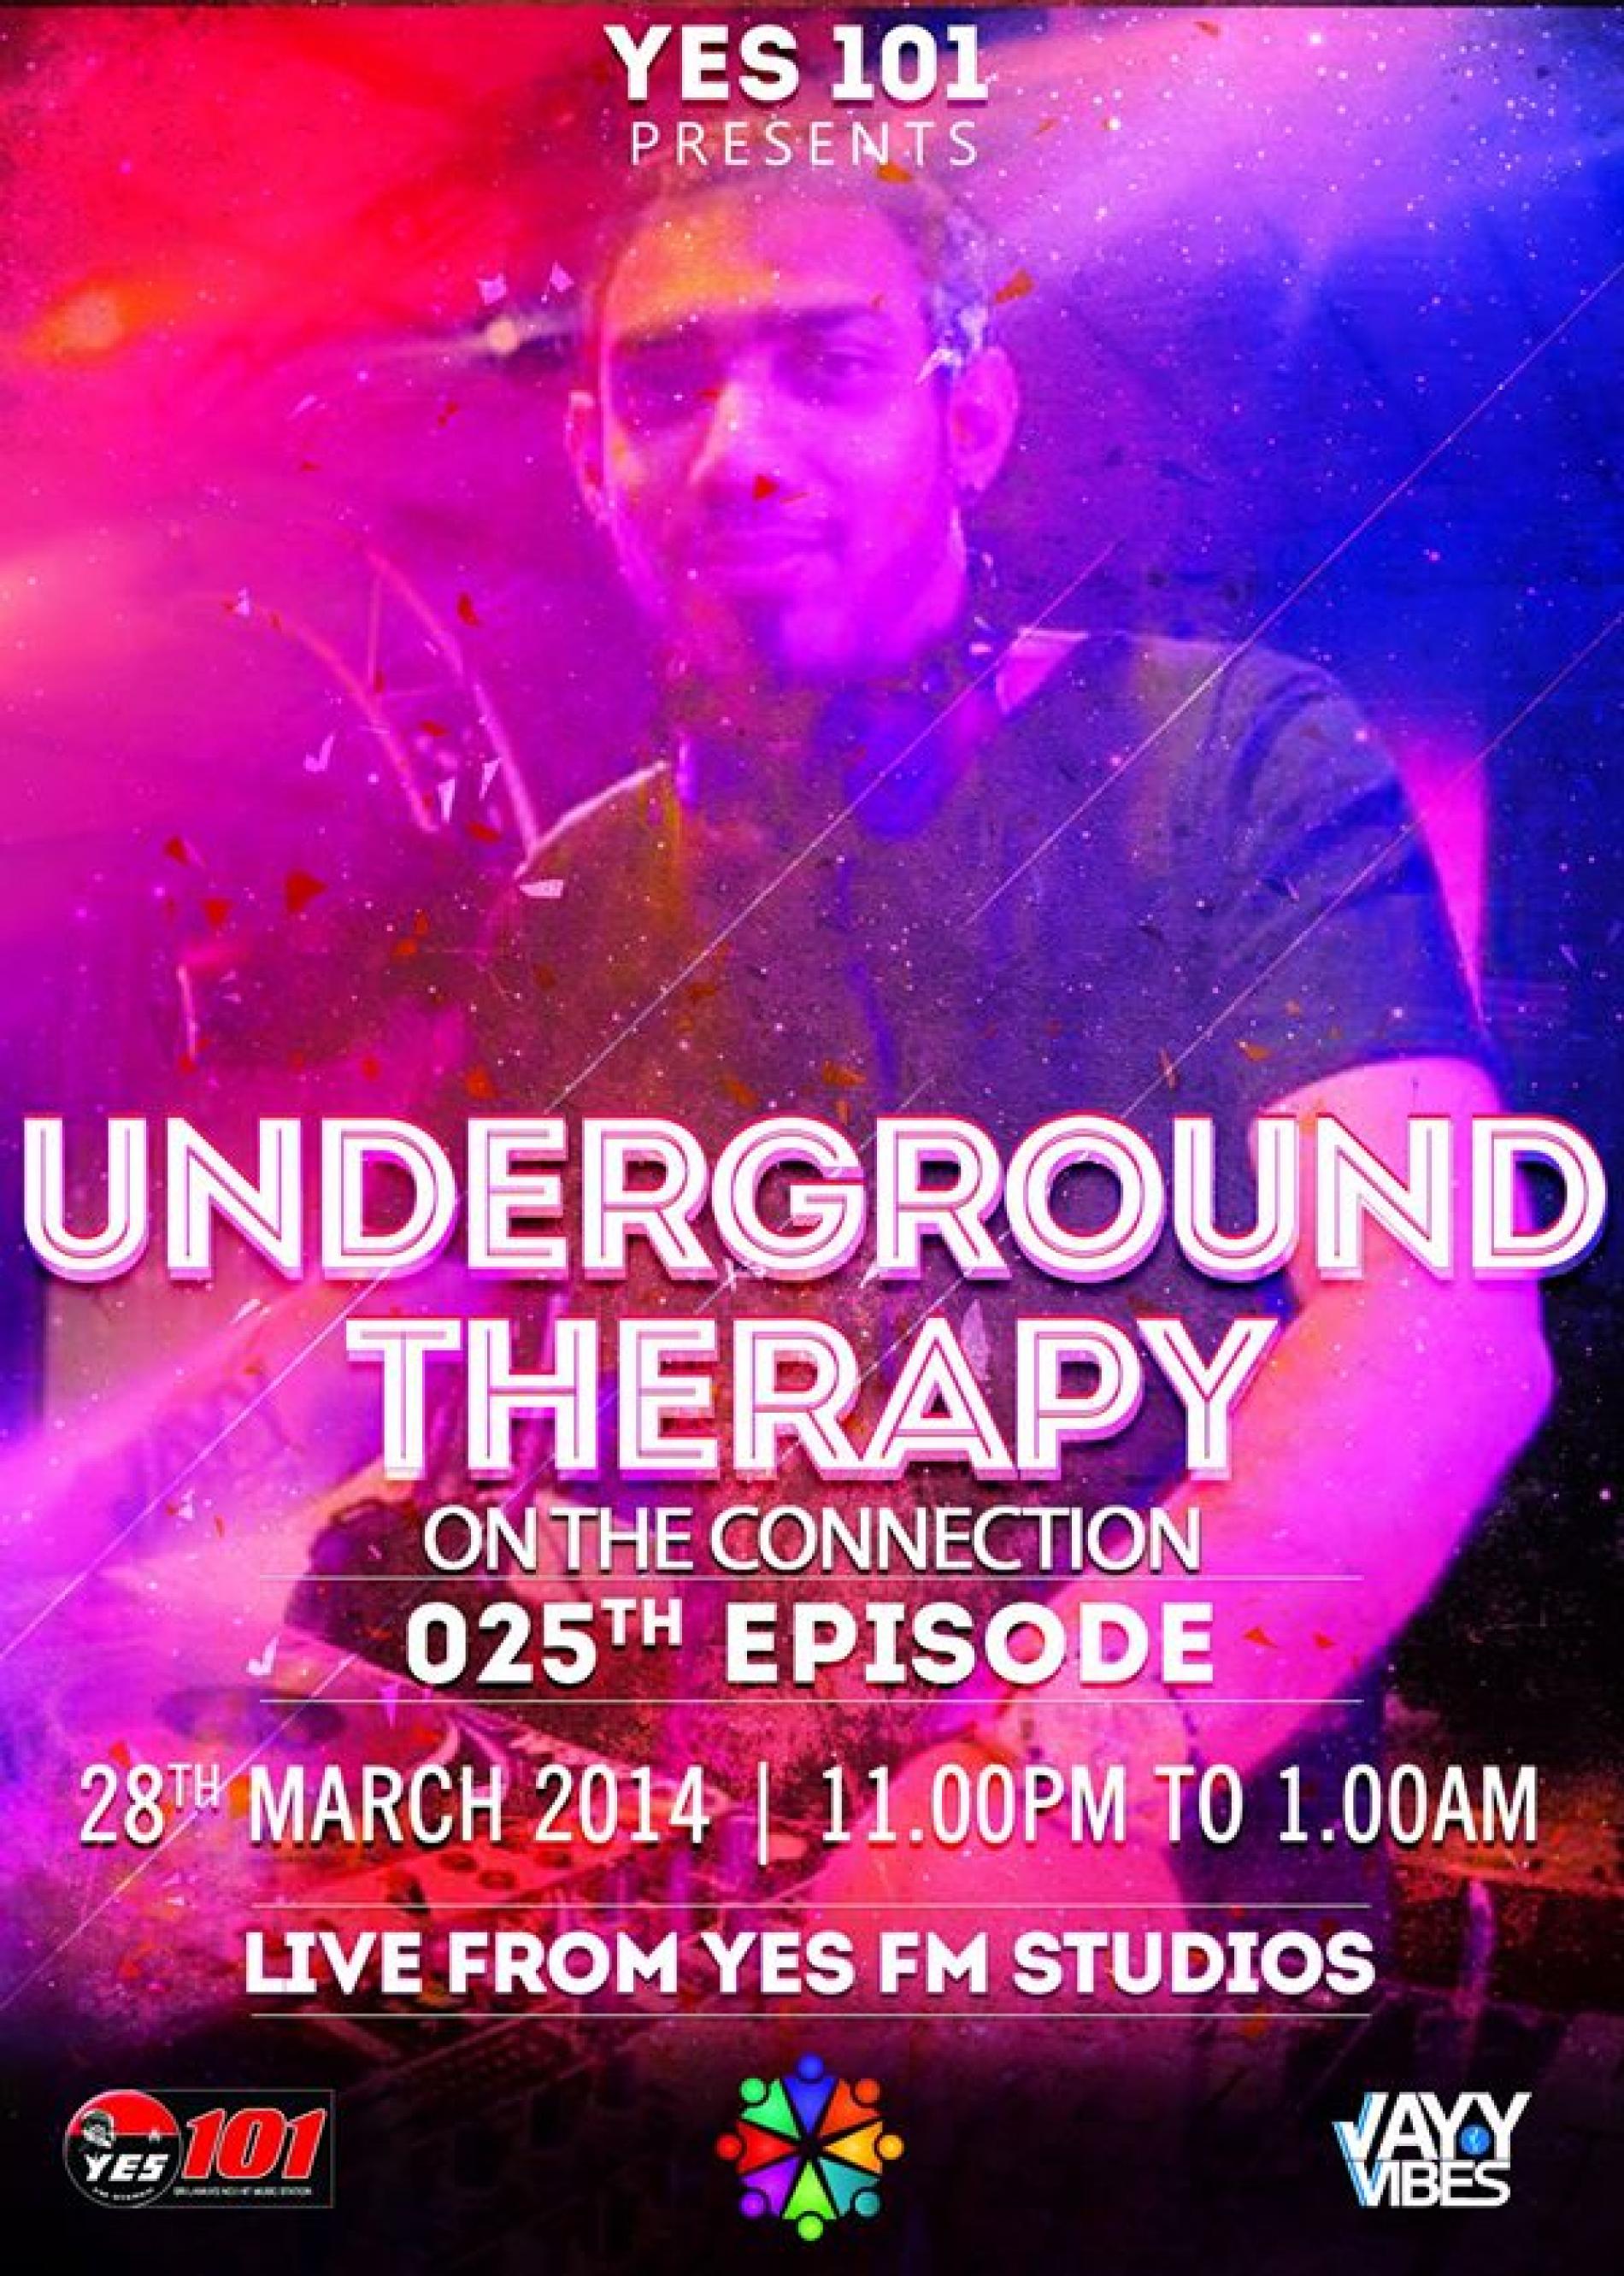 Jayy Vibes: 25th Episode Of Underground Therapy Goes Live